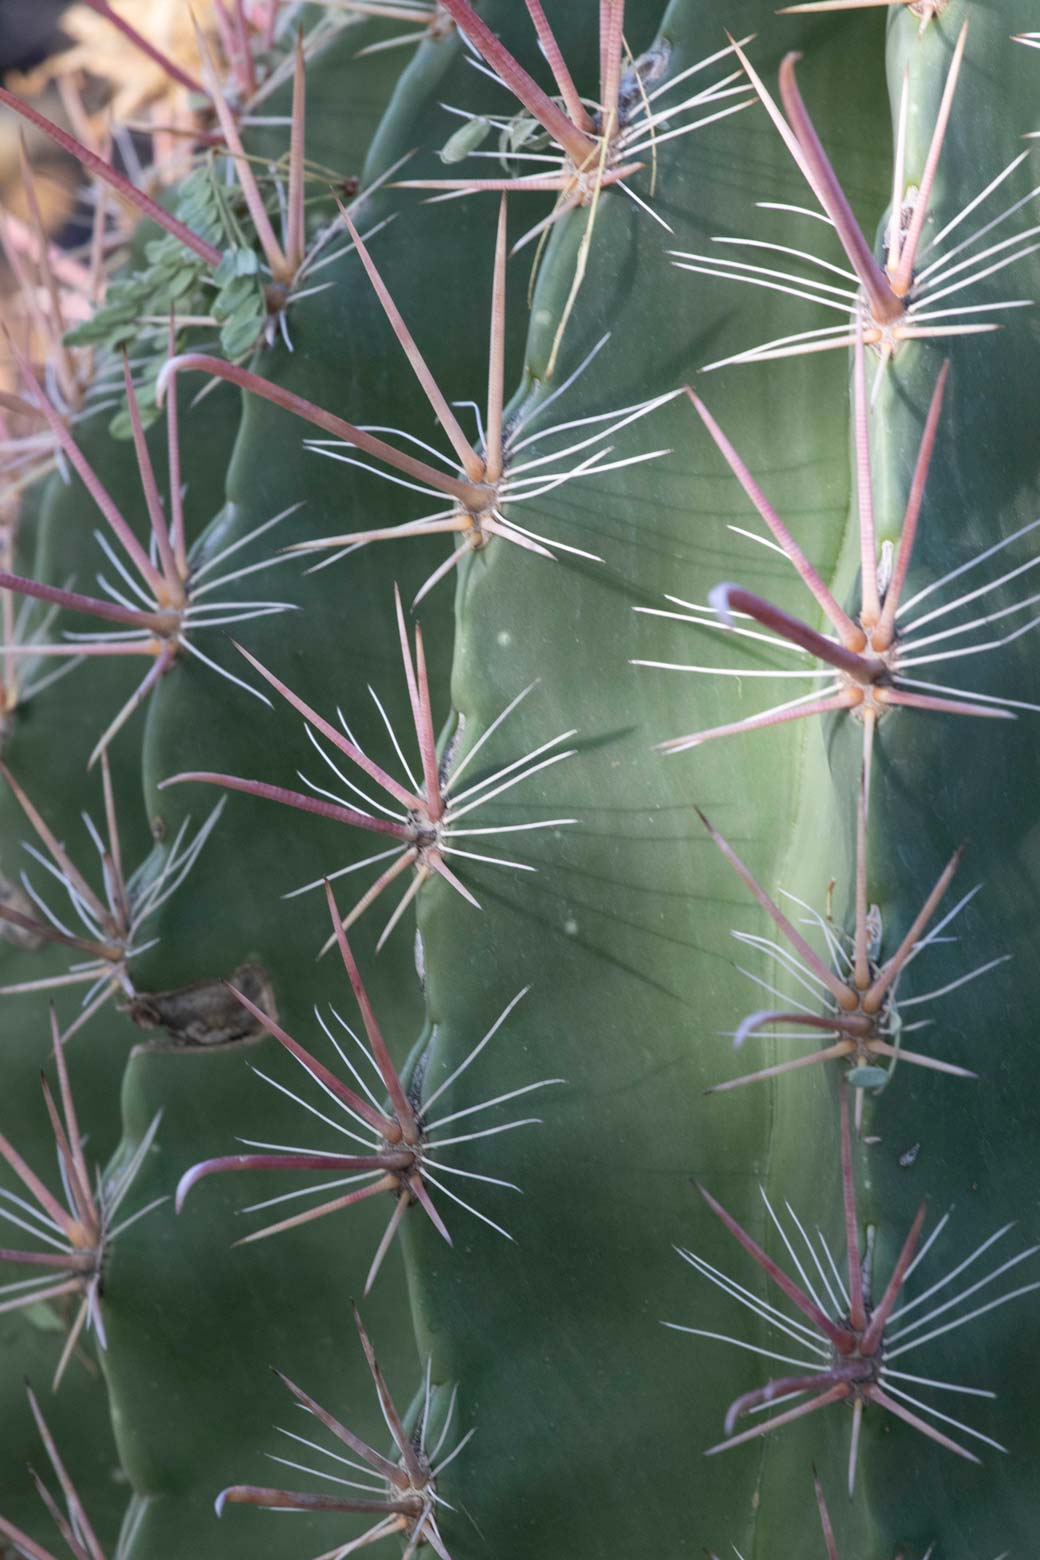 A close-up of the ribs and spines of the Fish Hook cactus.